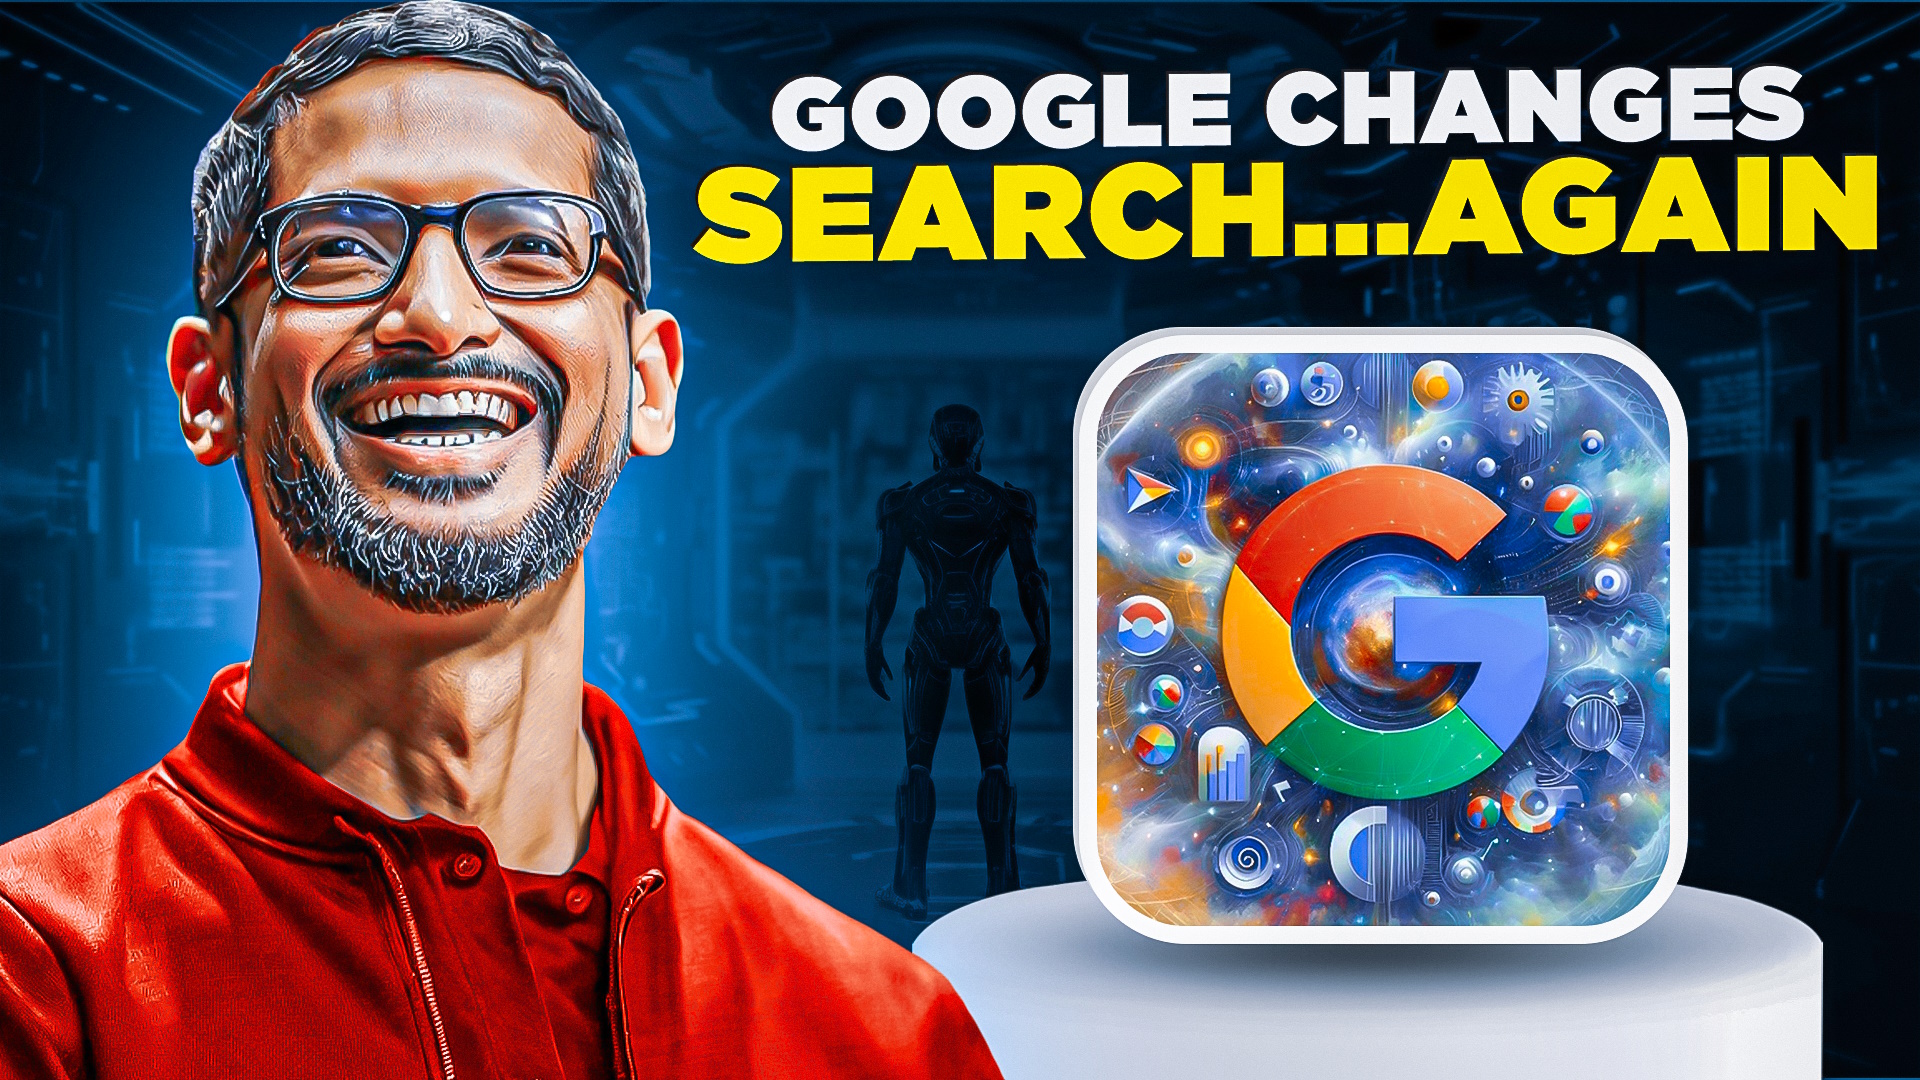 The Future of Search According to Google CEO